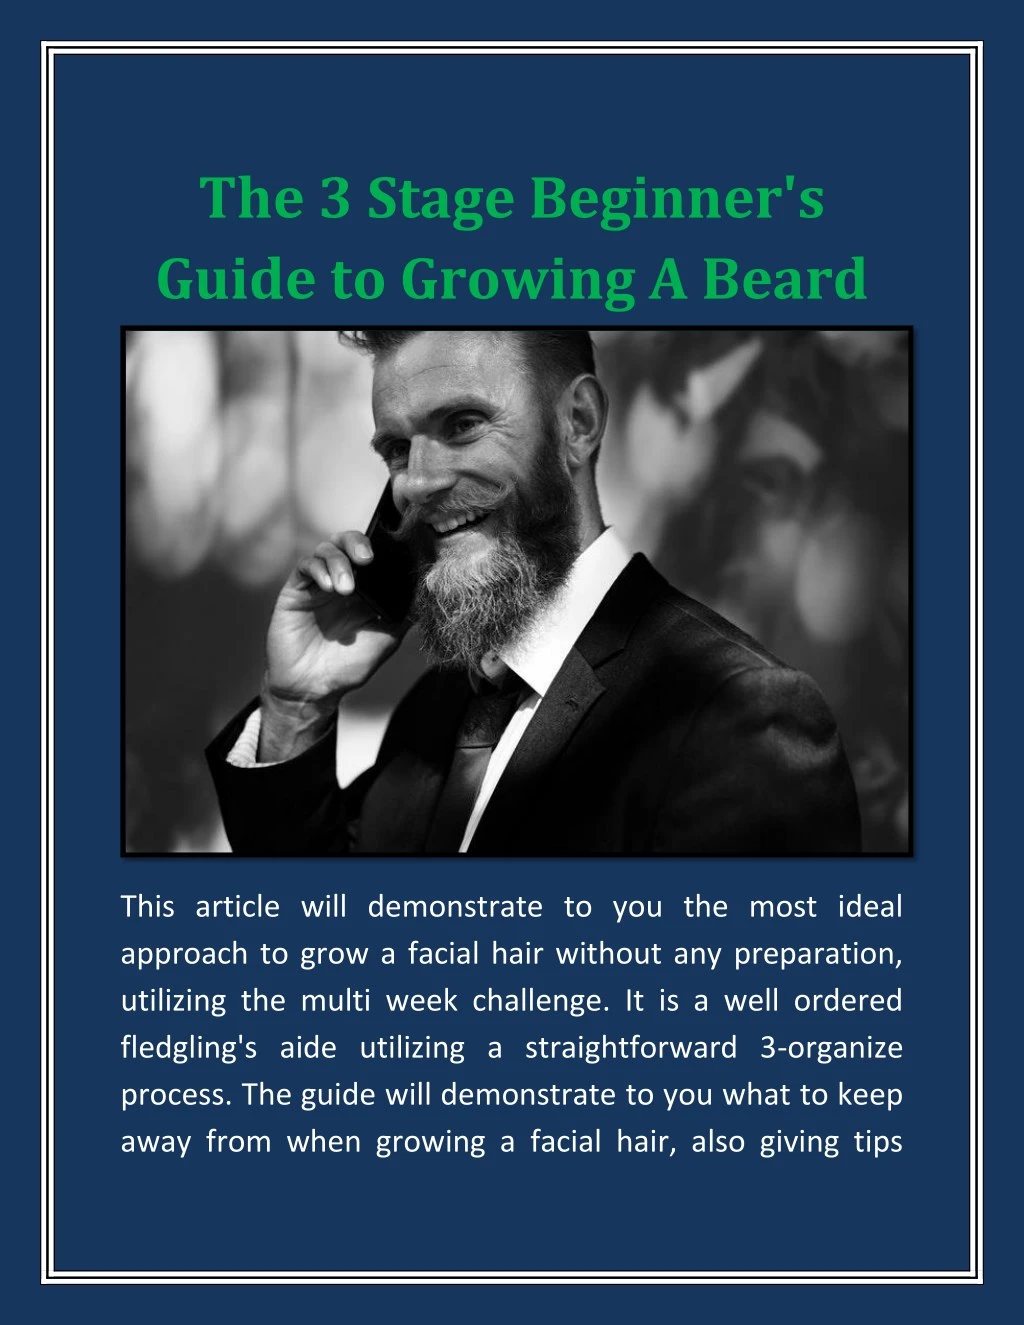 The 3 Stage Beginner's Guide To Growing A Beard